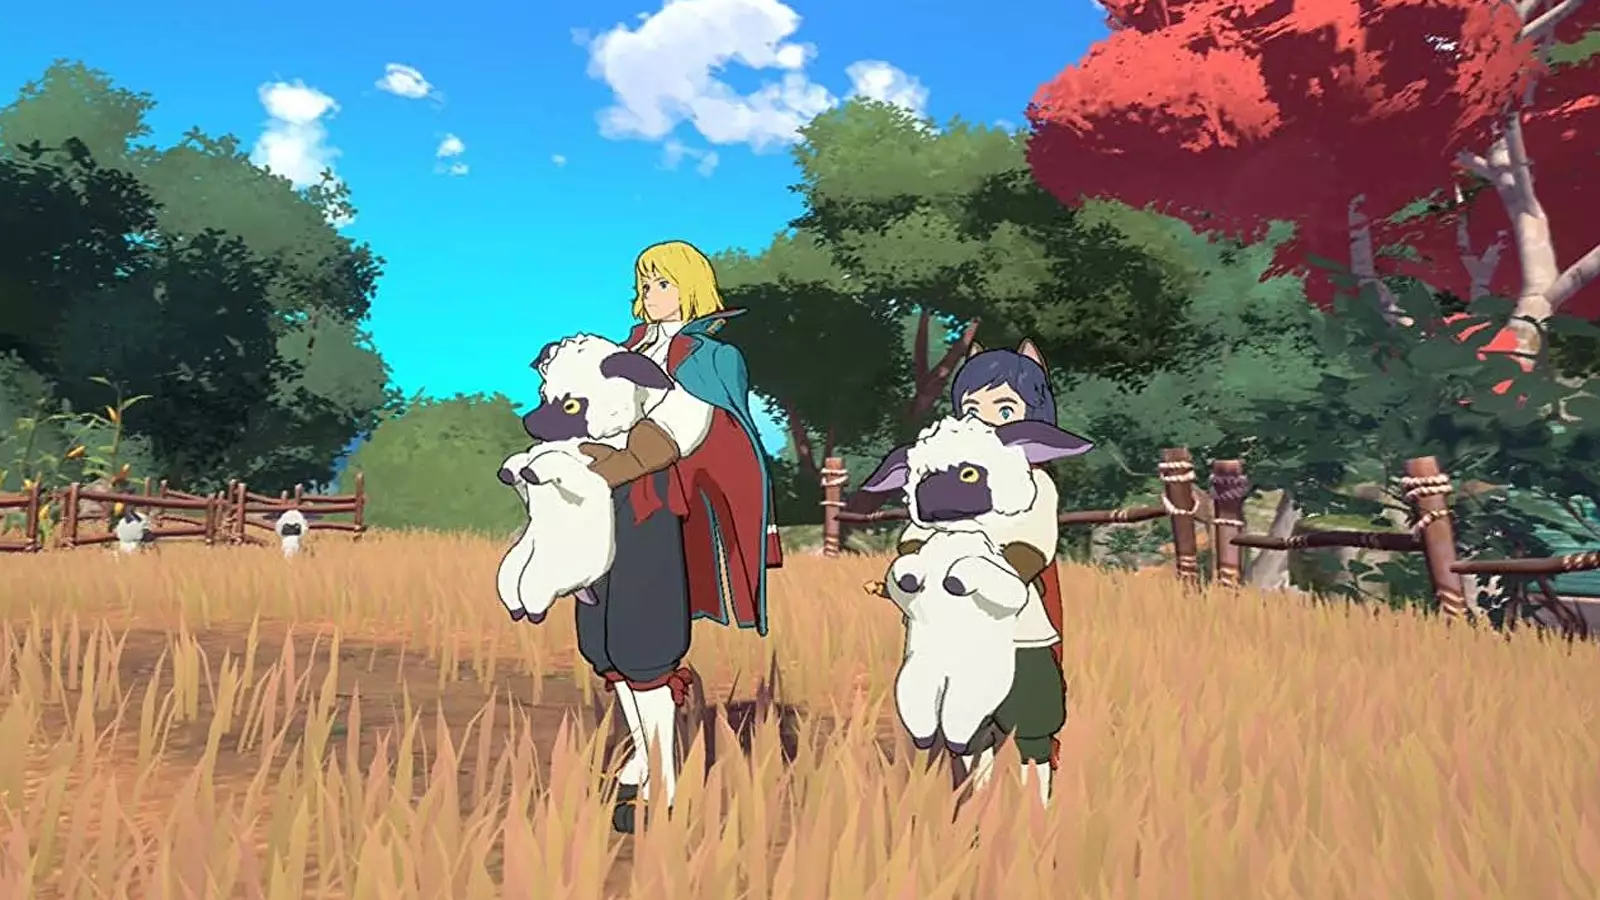 ni no kuni: cross worlds gameplay showing players in a field